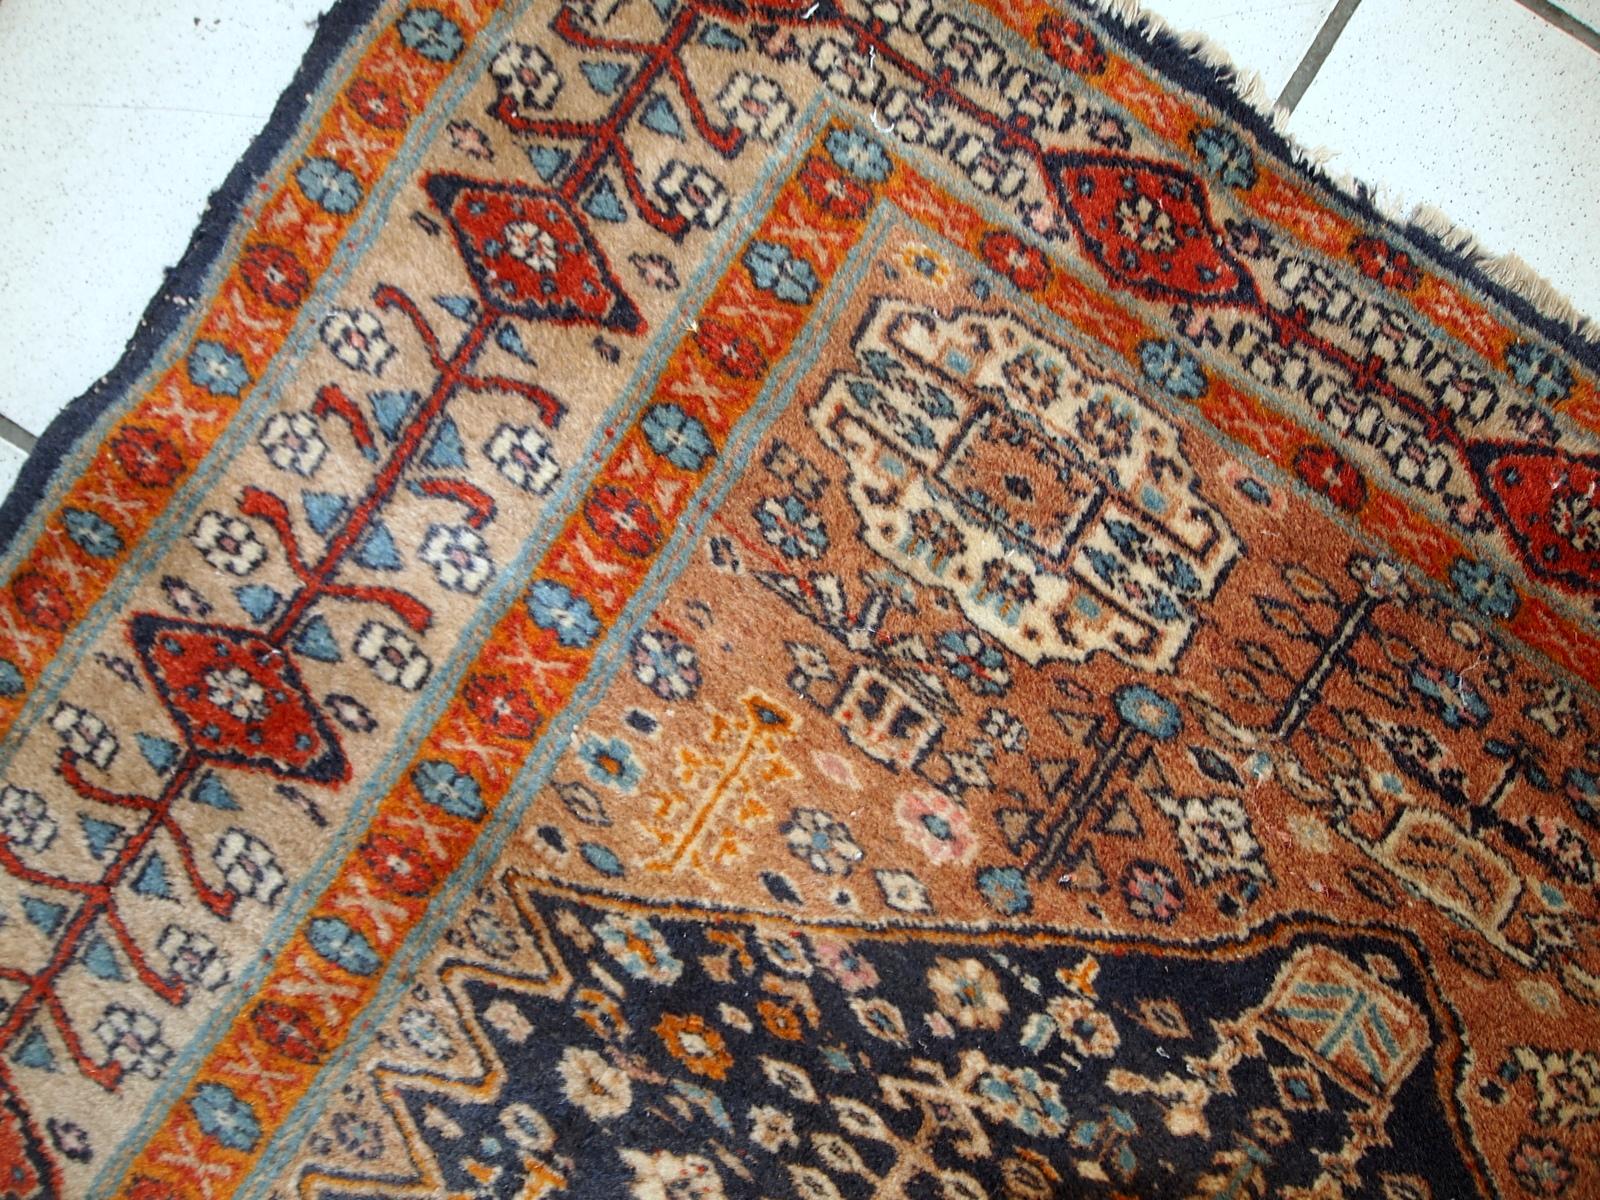 Handmade antique Baluch rug from Central Asia in original condition, it has some age wear. The rug is from the beginning of 20th century.

?-condition: original, some age wear,

-circa: 1920s,

-size: 3.1' x 4.9' (95cm x 149cm),

-material: